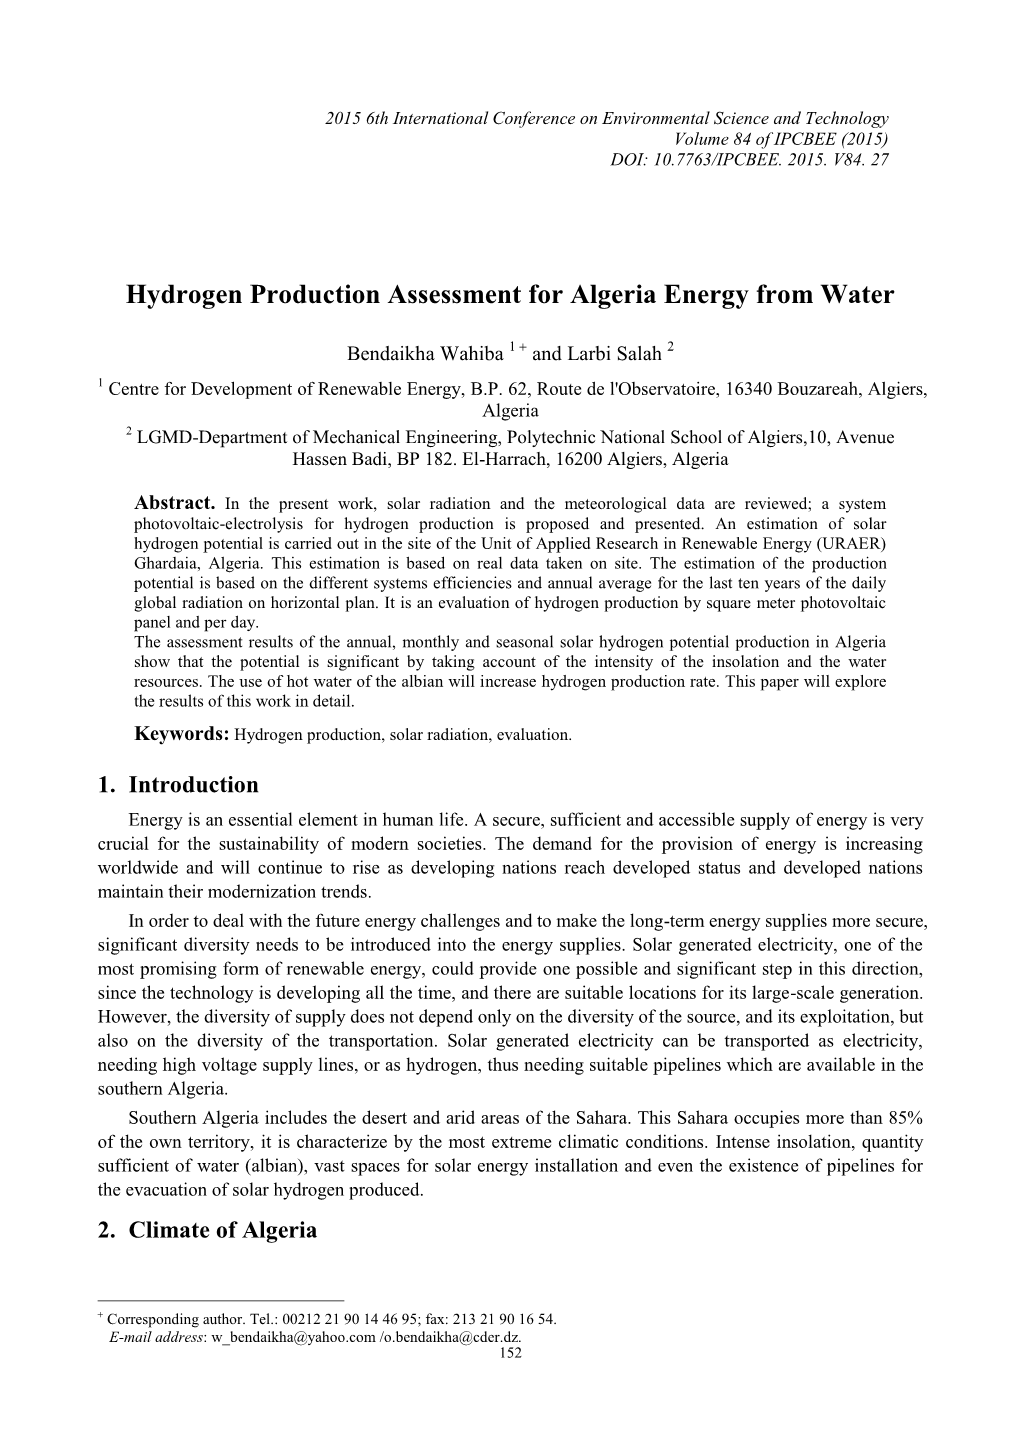 Hydrogen Production Assessment for Algeria Energy from Water